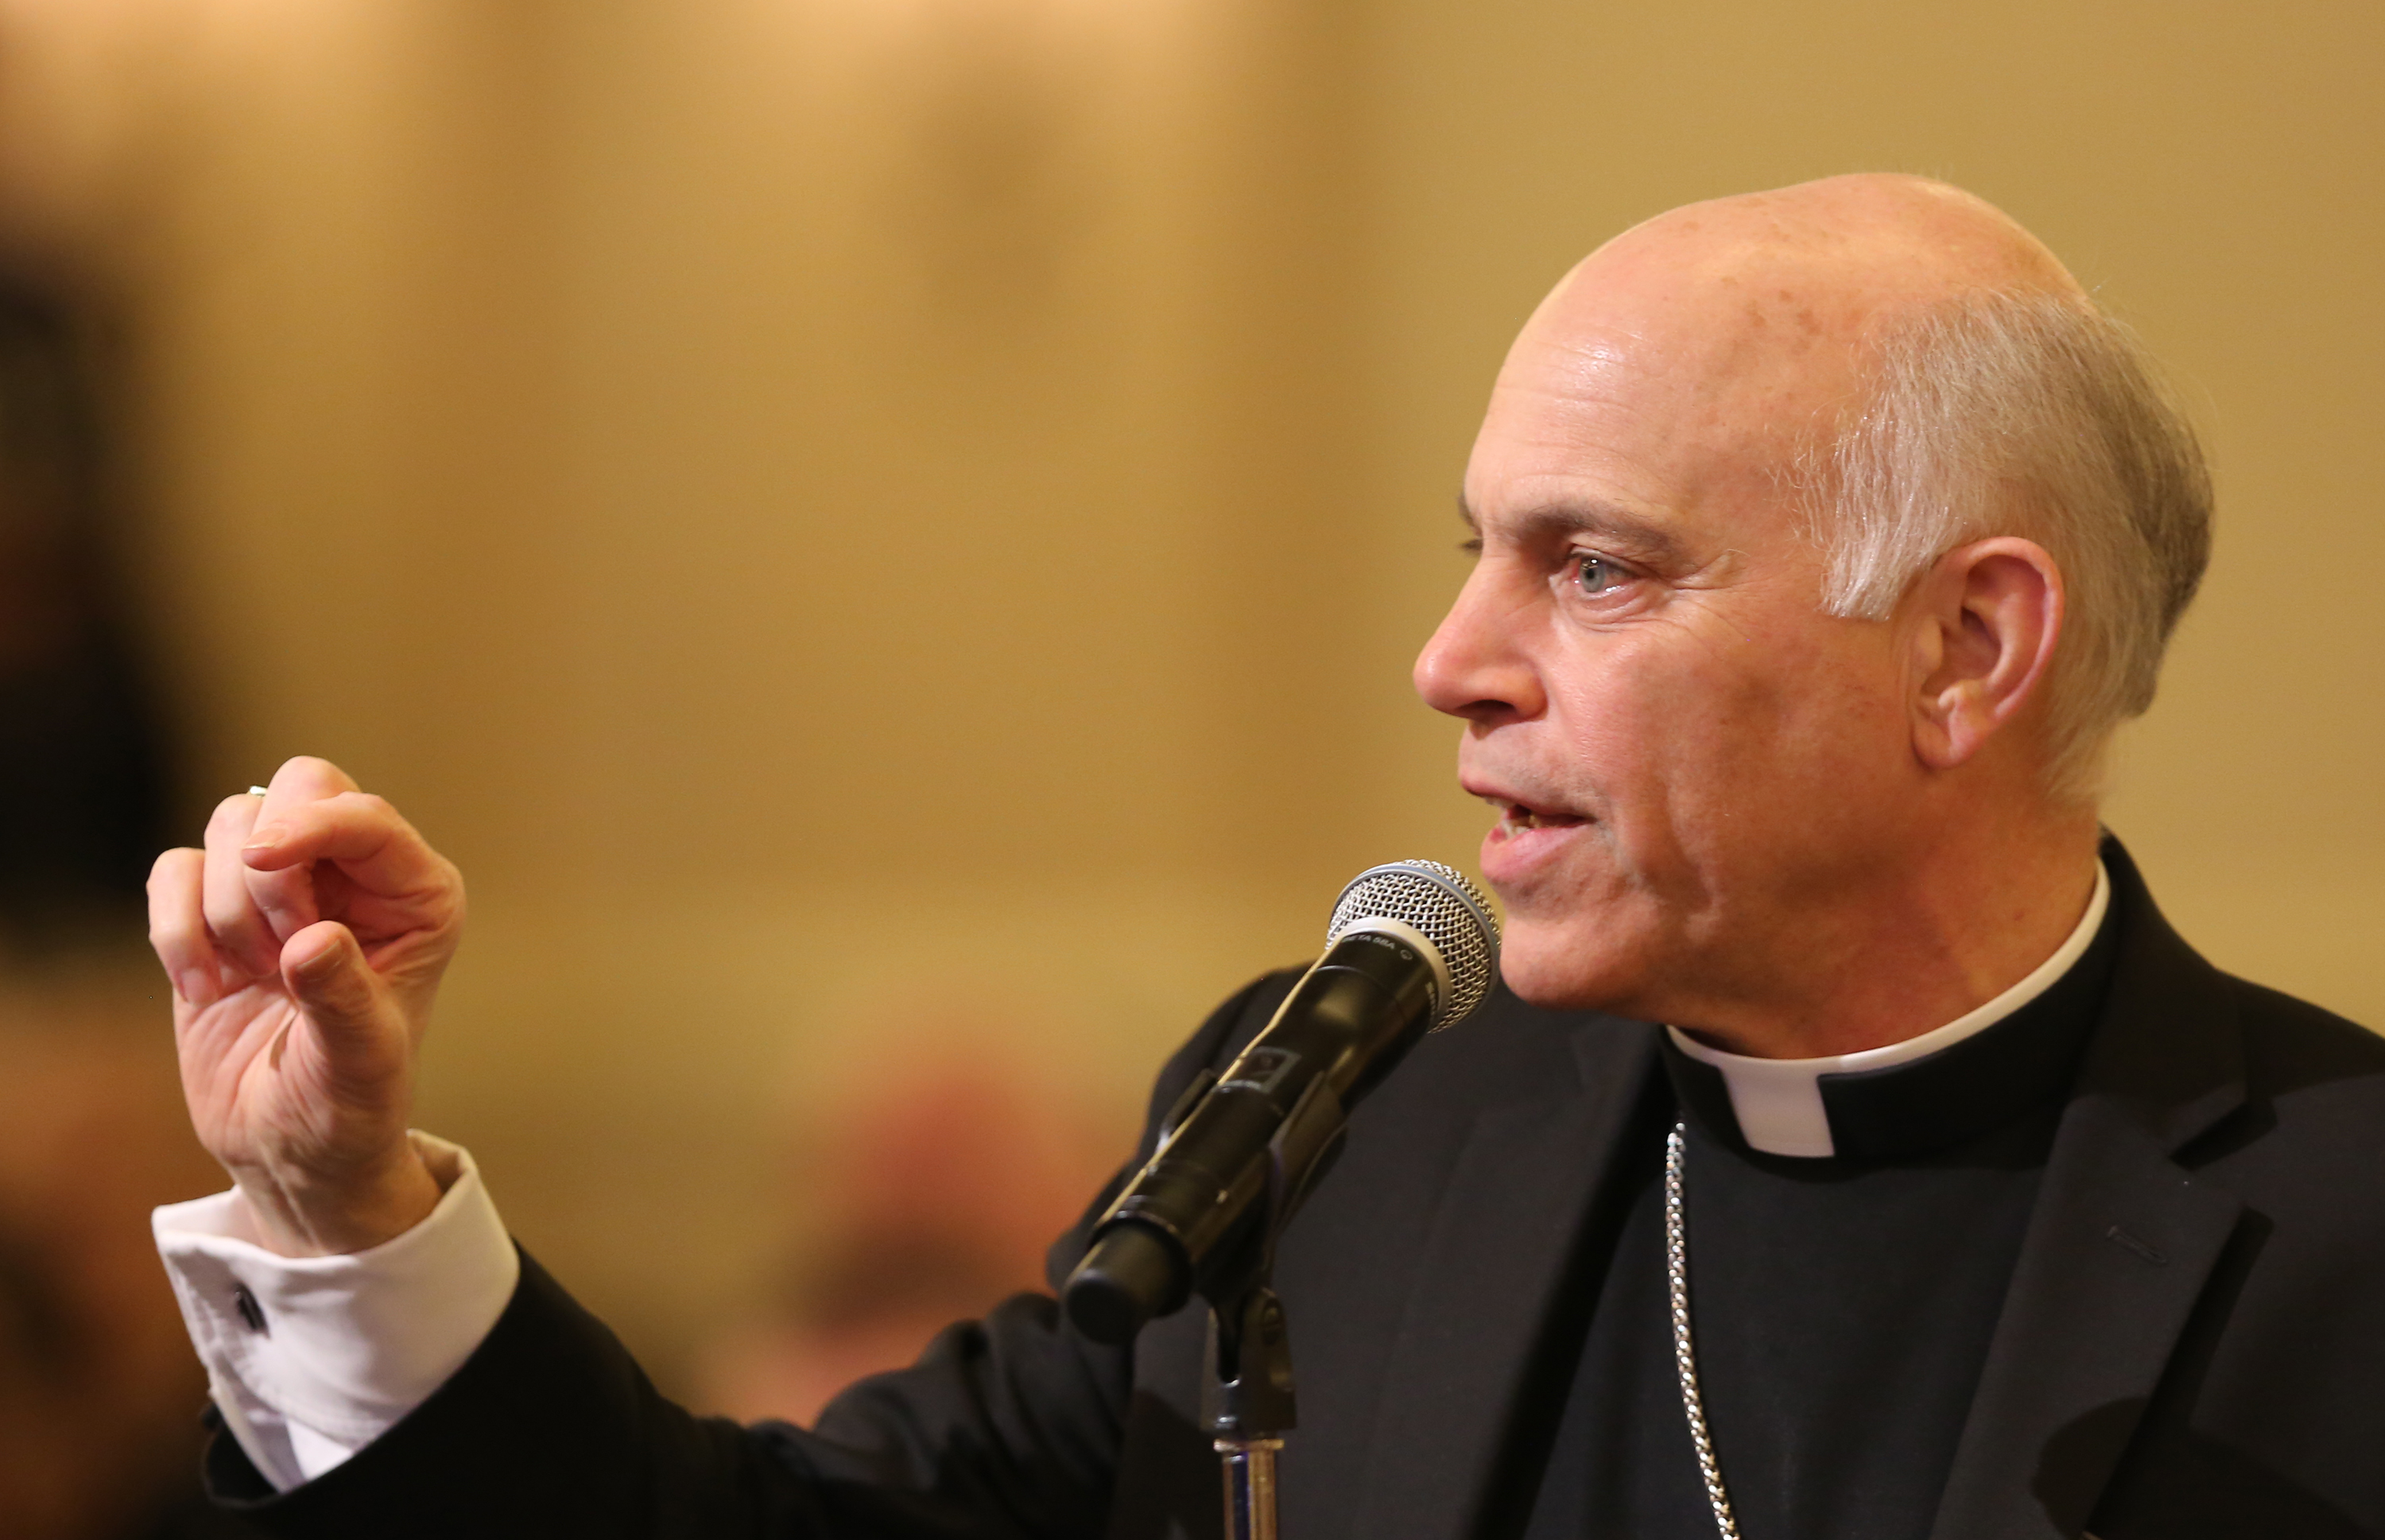 Archbishop of San Francisco says Viganò claims must be taken seriously